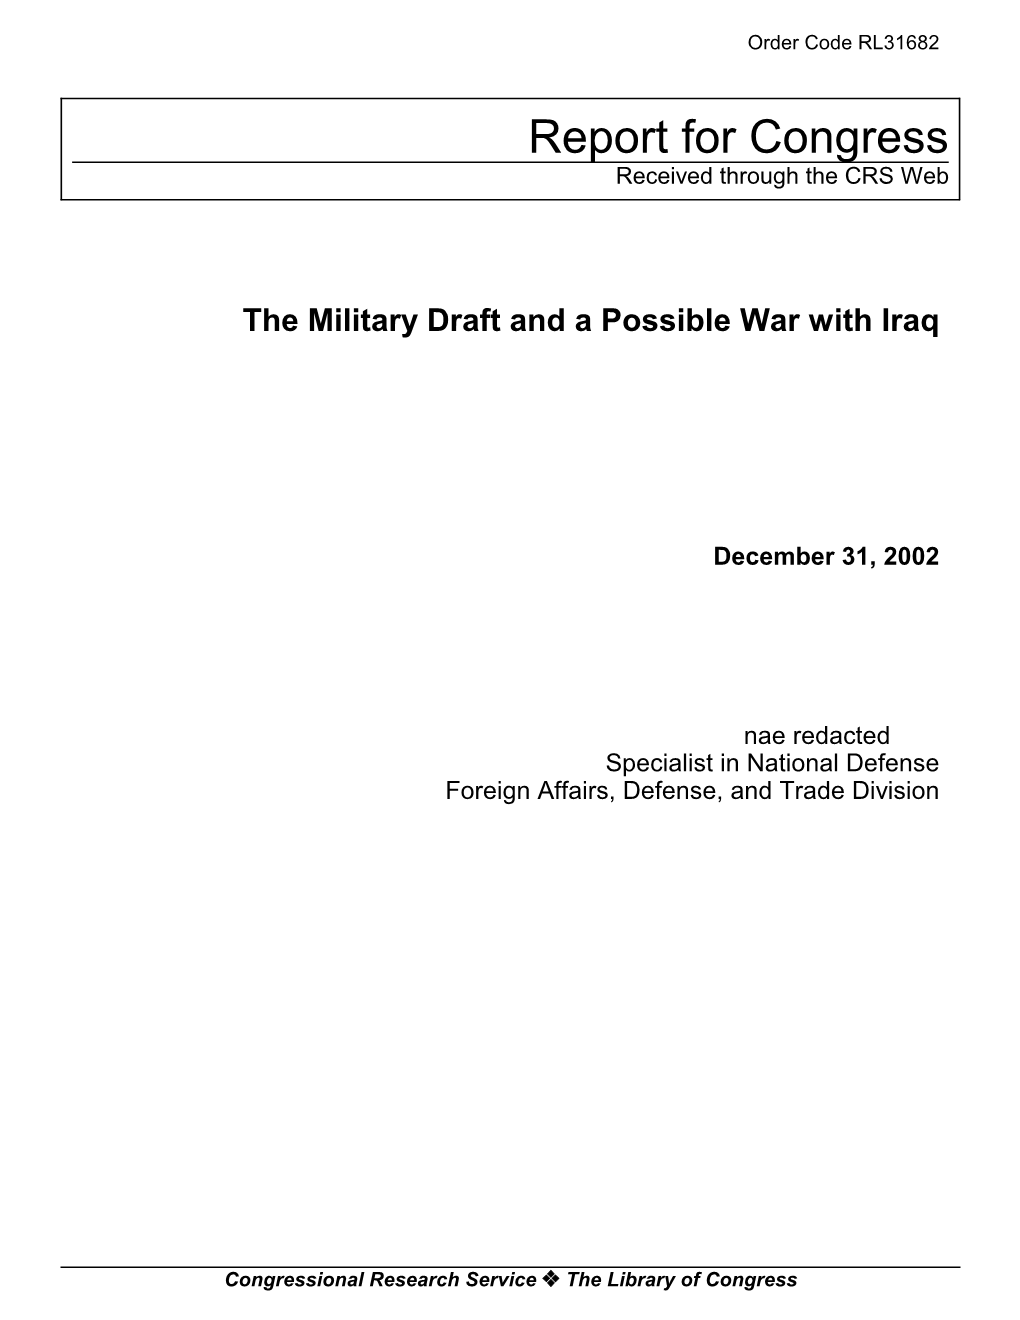 The Military Draft and a Possible War with Iraq